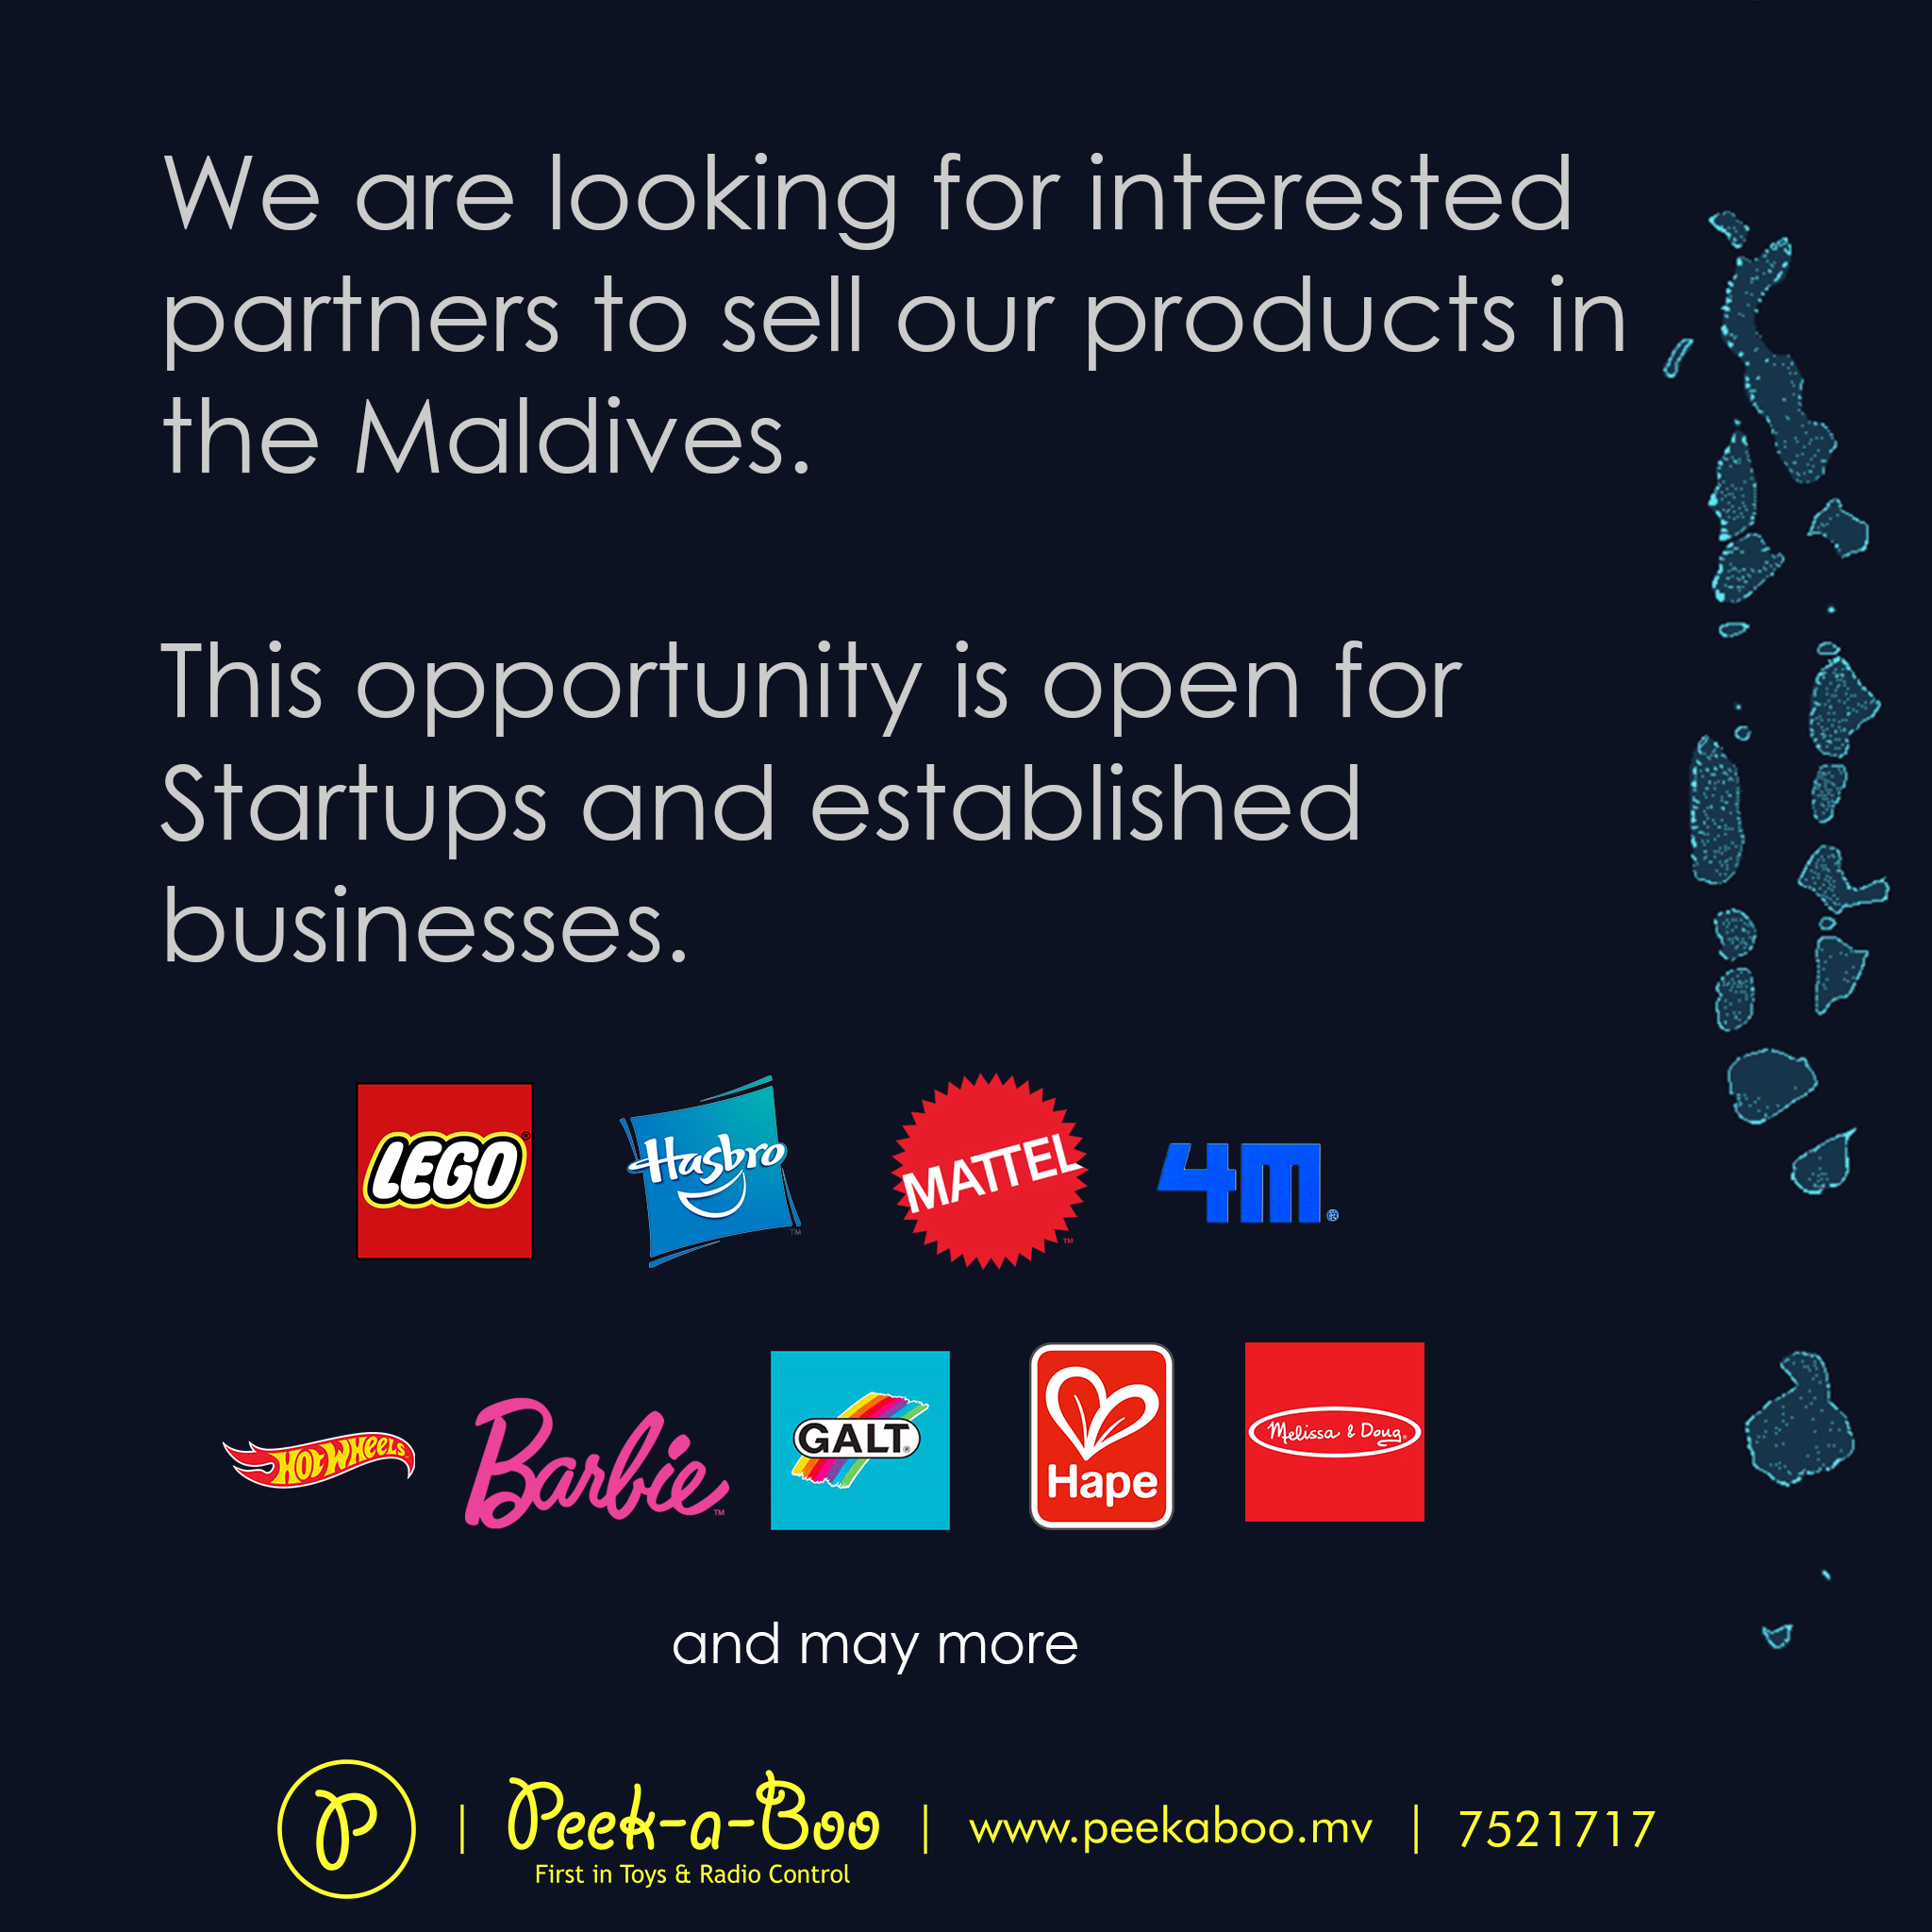 Peekaboo on "We are looking for interested partners to sell our products in the Maldives. This opportunity is open for Startups established businesses. The following brands will be available. Lego,